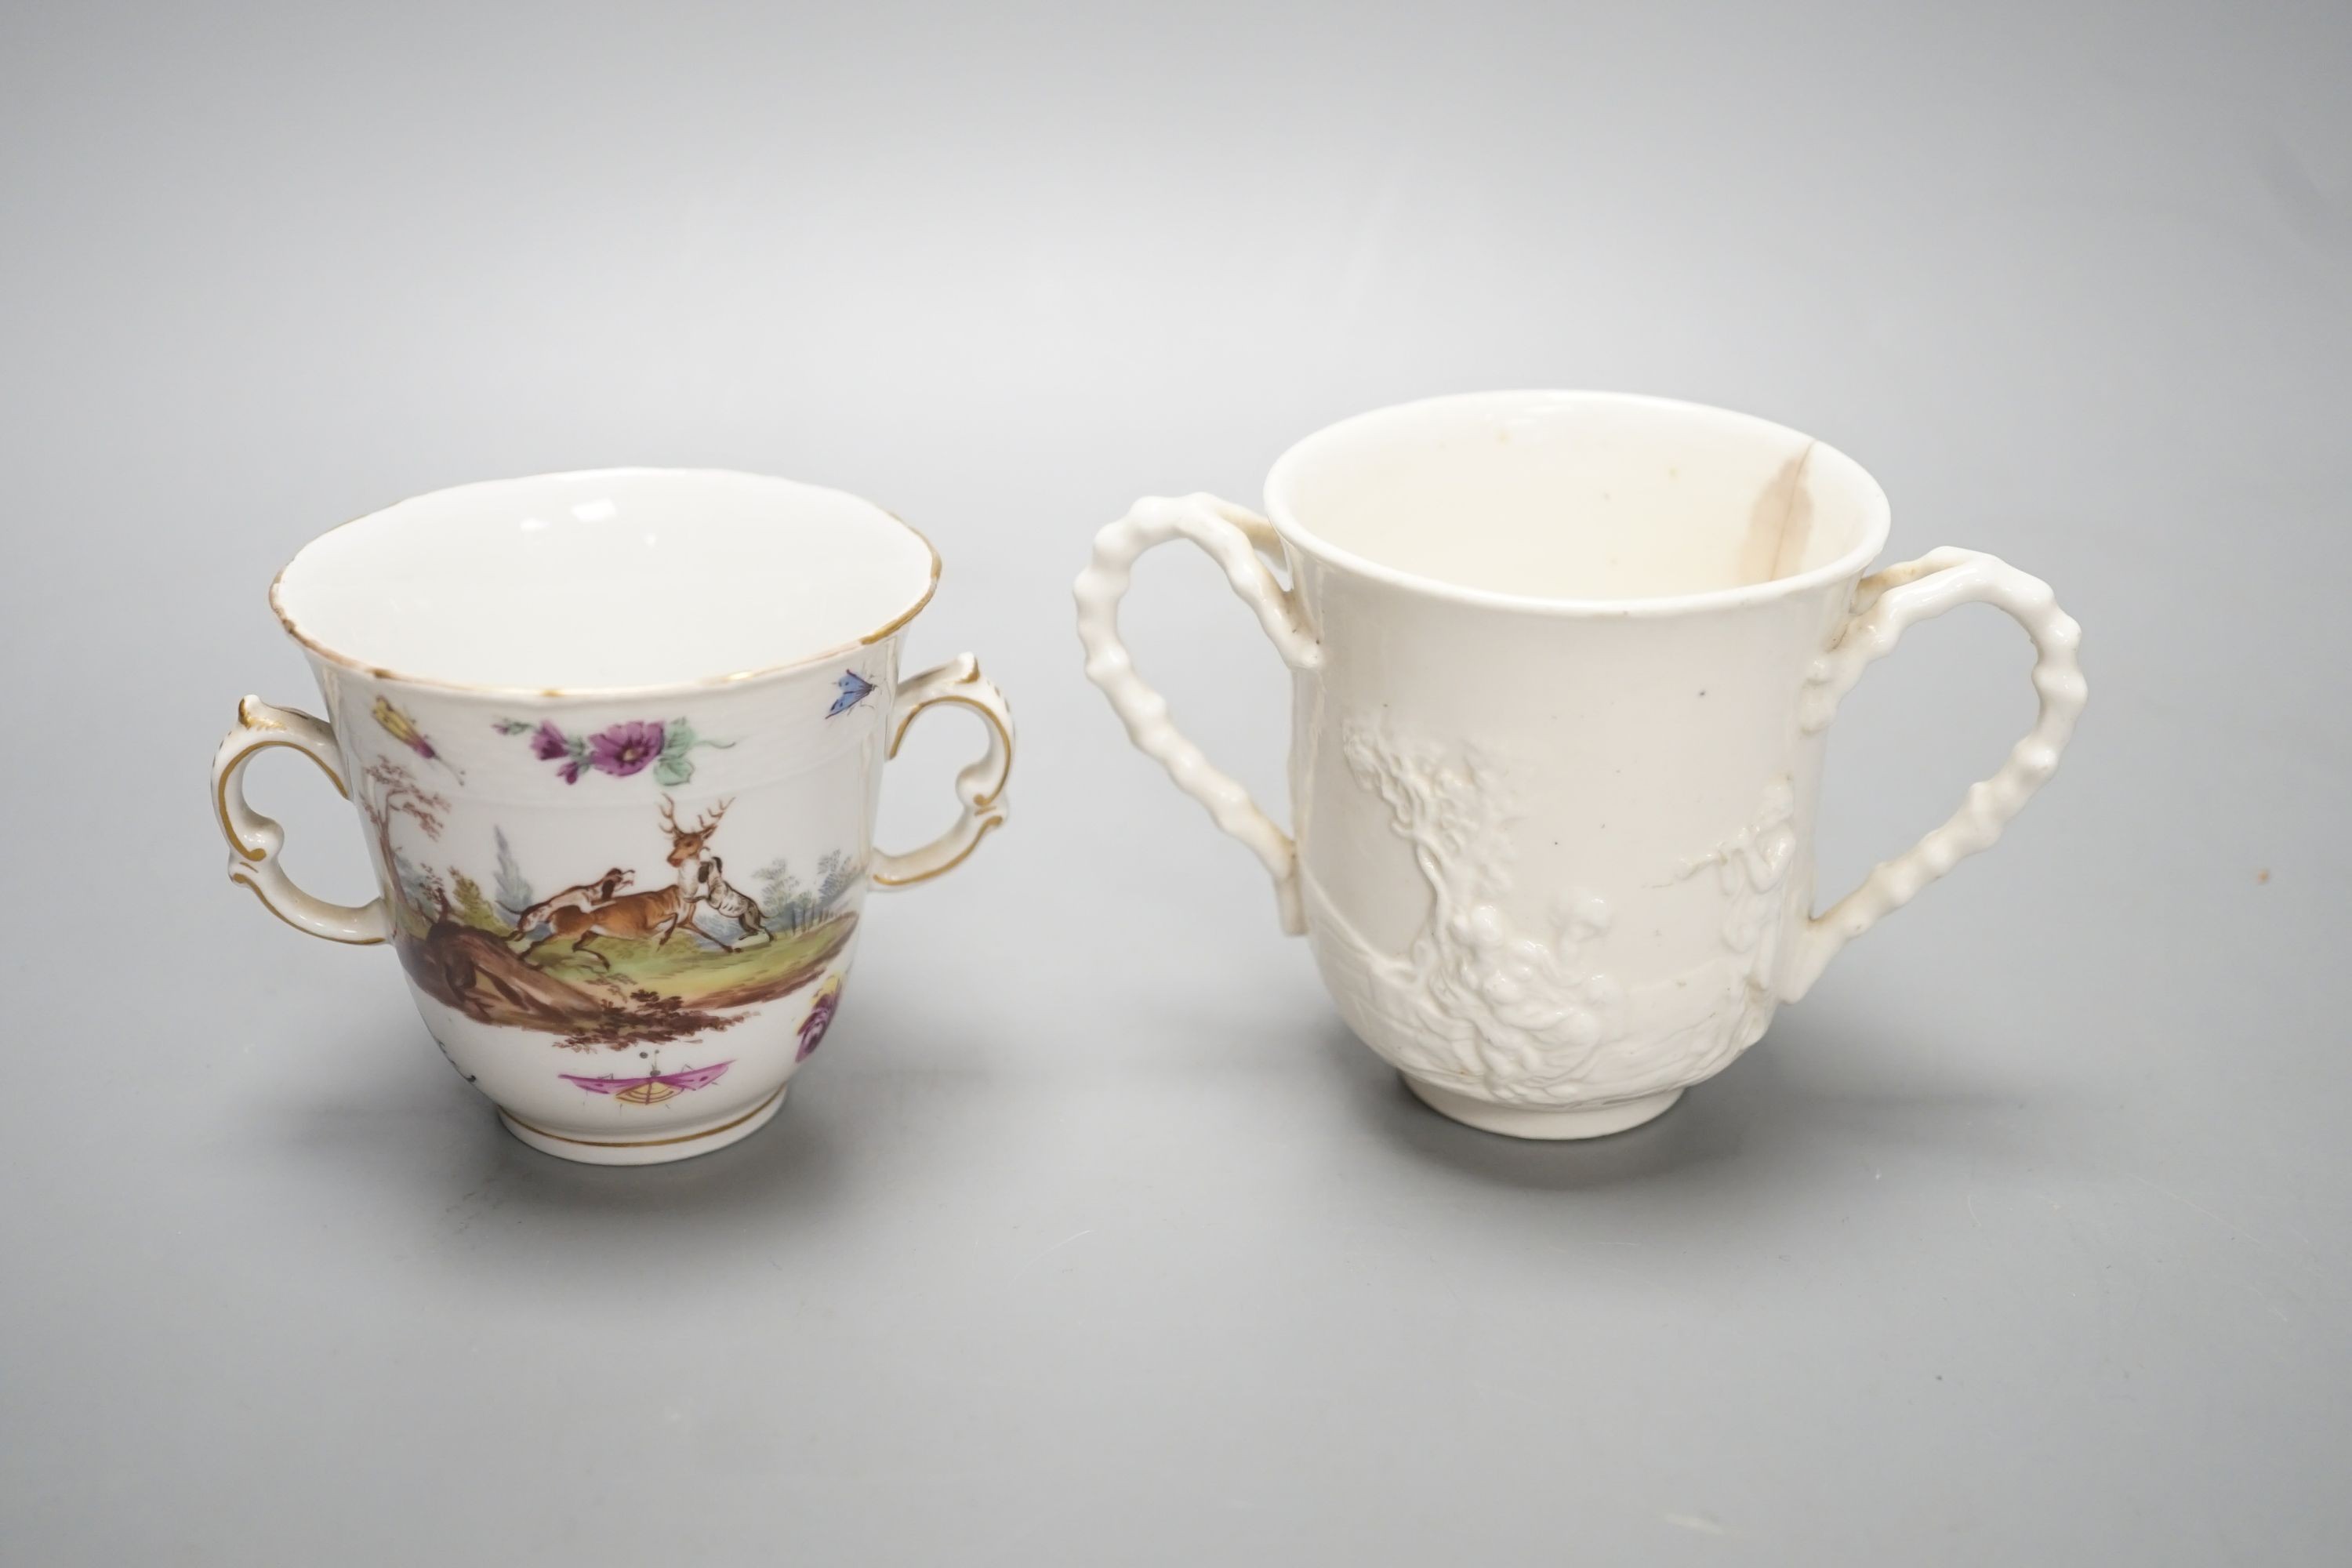 A late 18th / early 19th century Berlin two handled chocolate cup, 7cm high, painted with hunting scenes and an 18th century Doccia two handled chocolate cup moulded in Istoriato style.